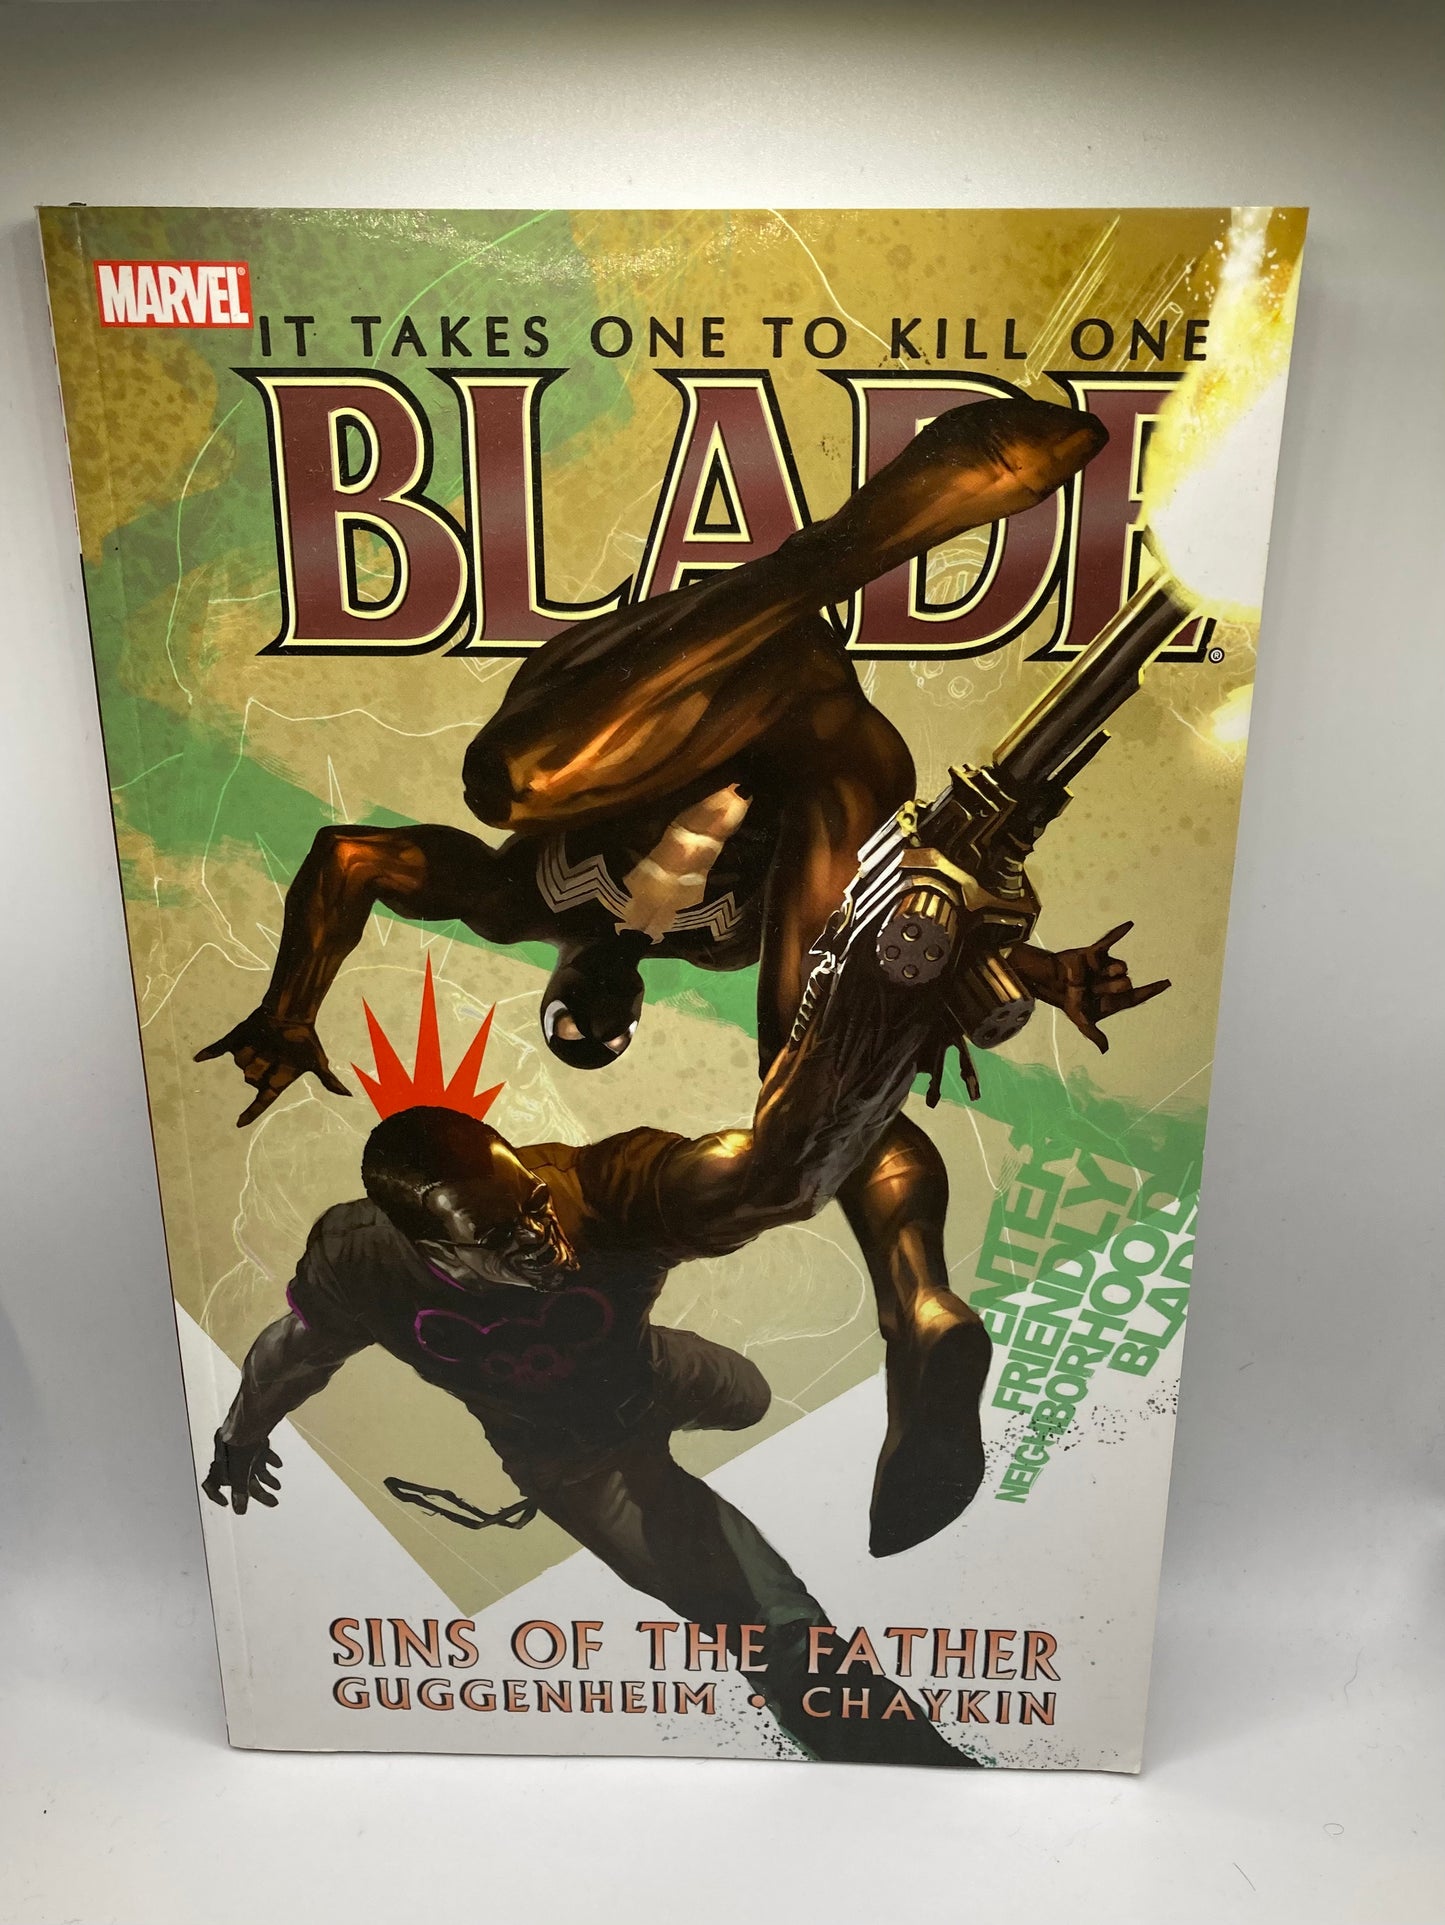 Blade: It Takes One to Kill One: Sins of the Father Vol. 4  # 10 by Guggenheim & Chaykin